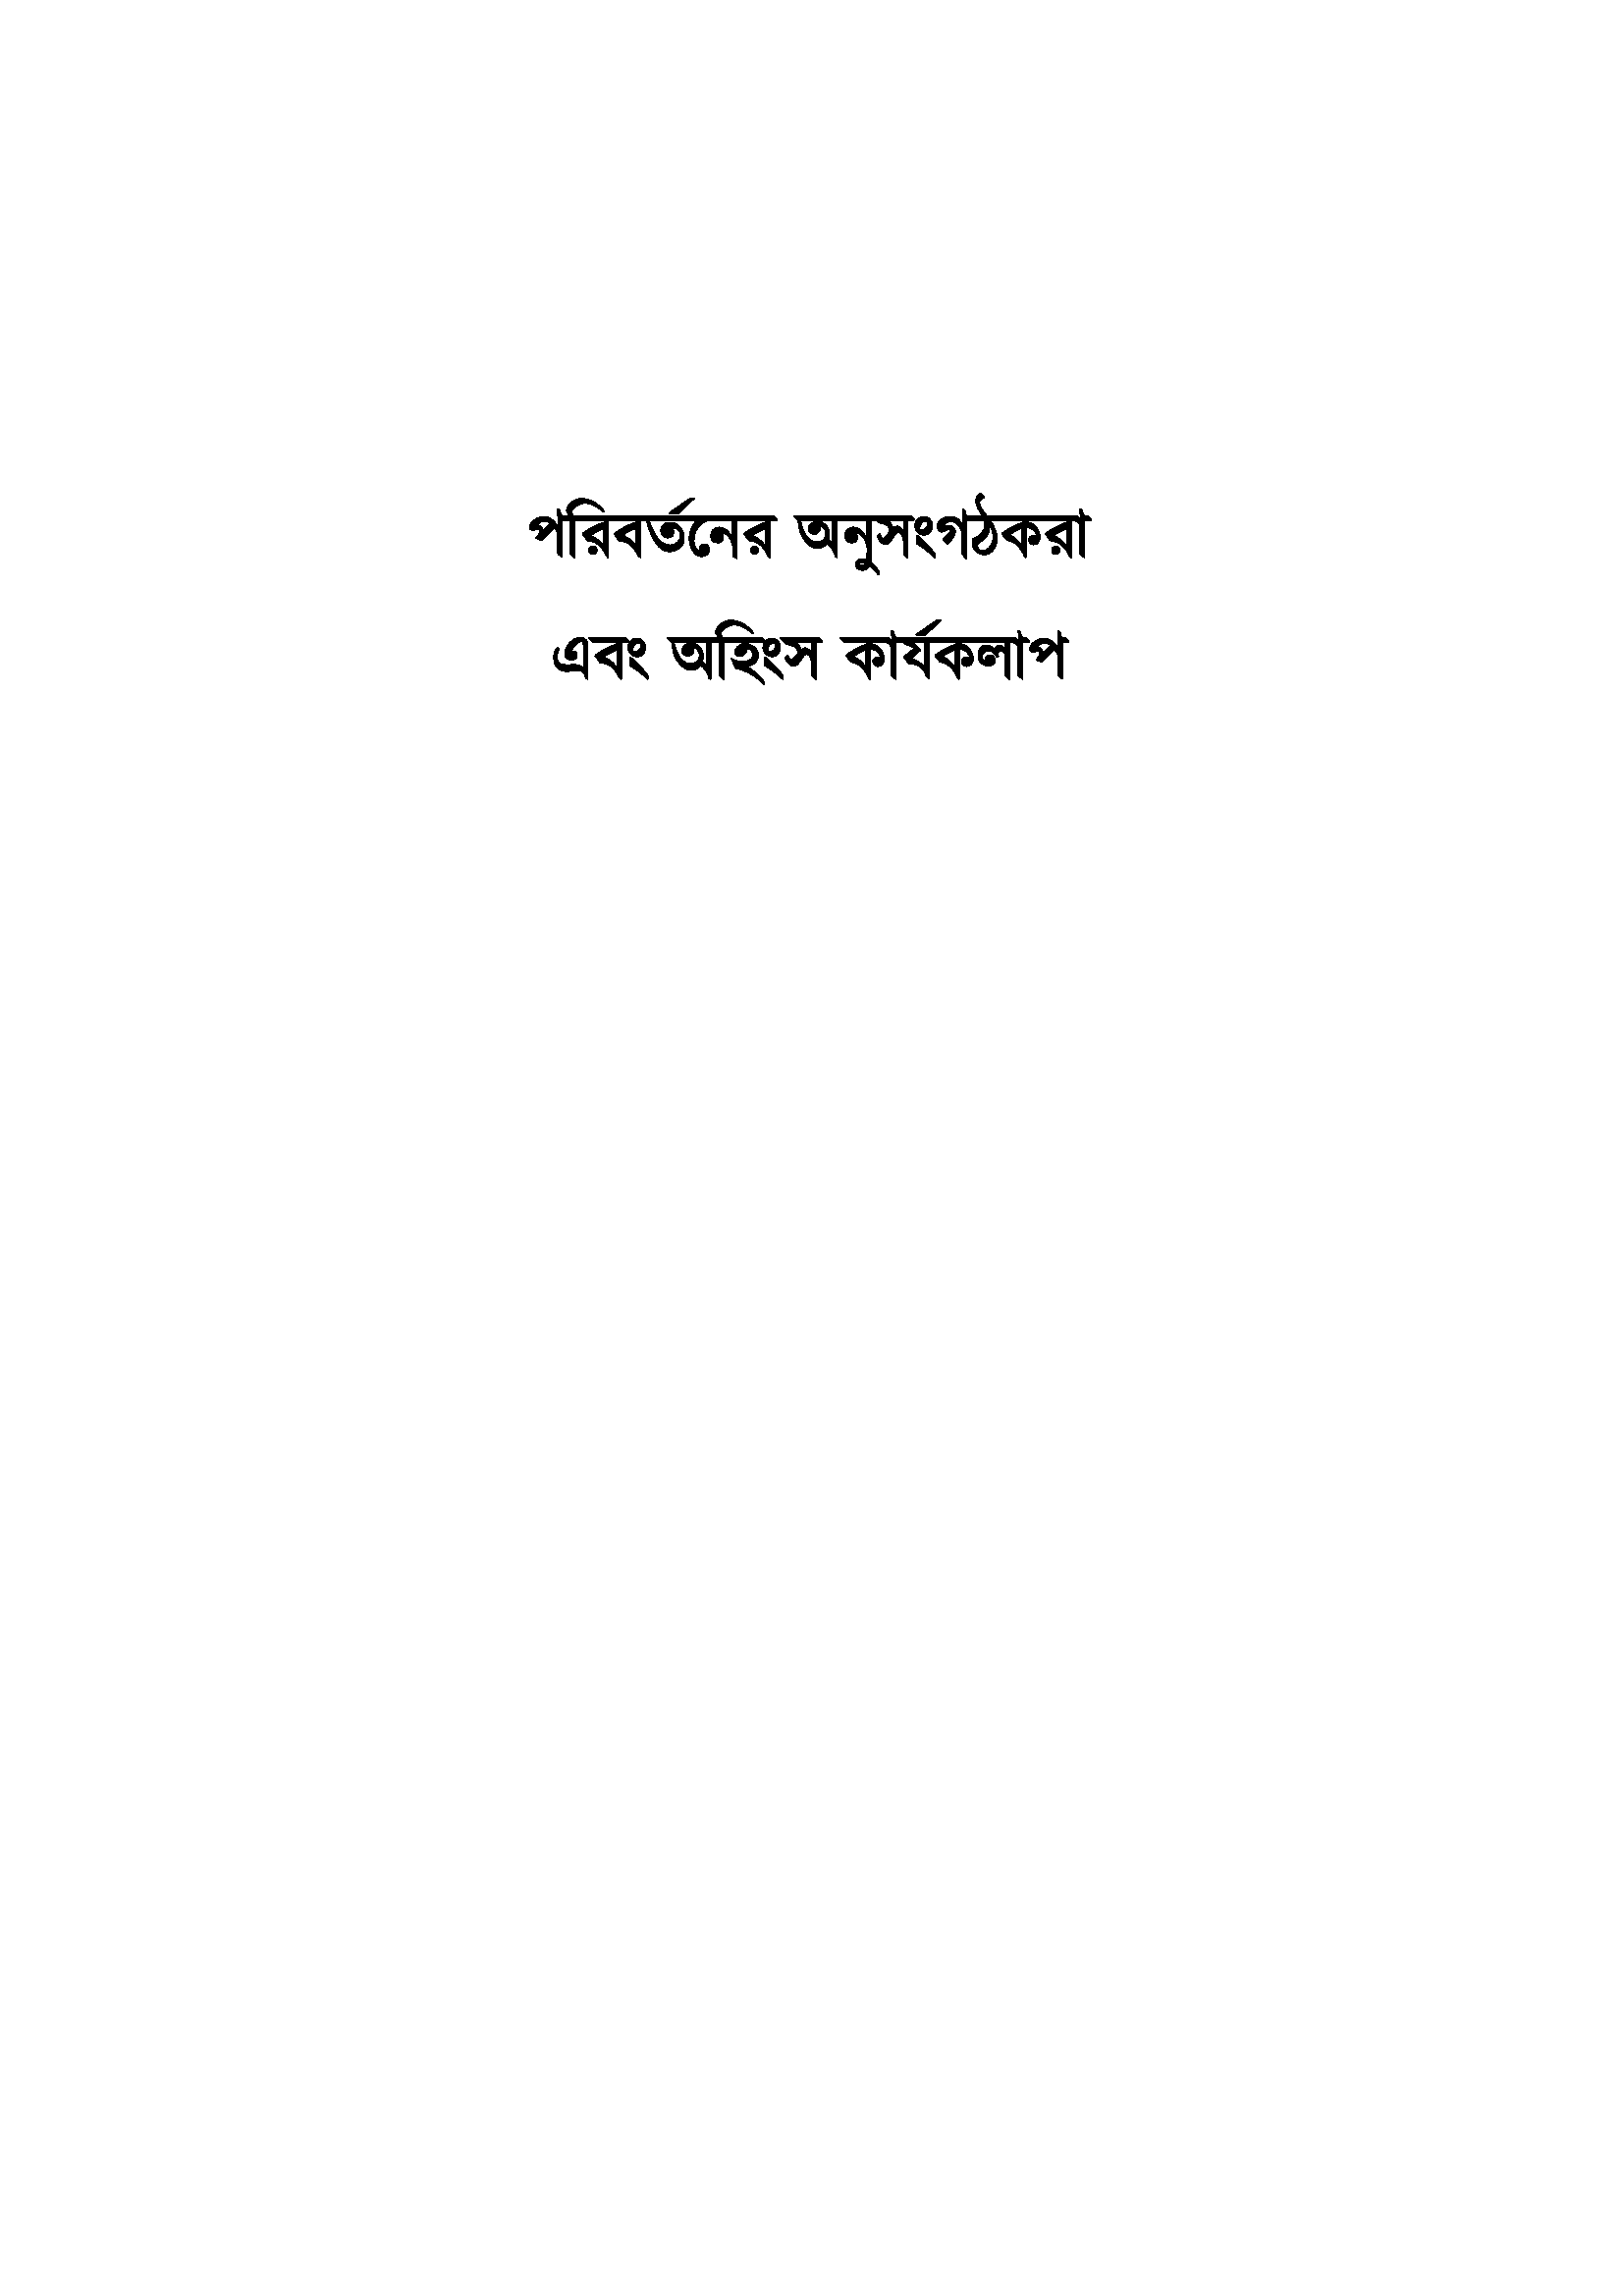 Agents of Change and Nonviolent Action (Bangla)